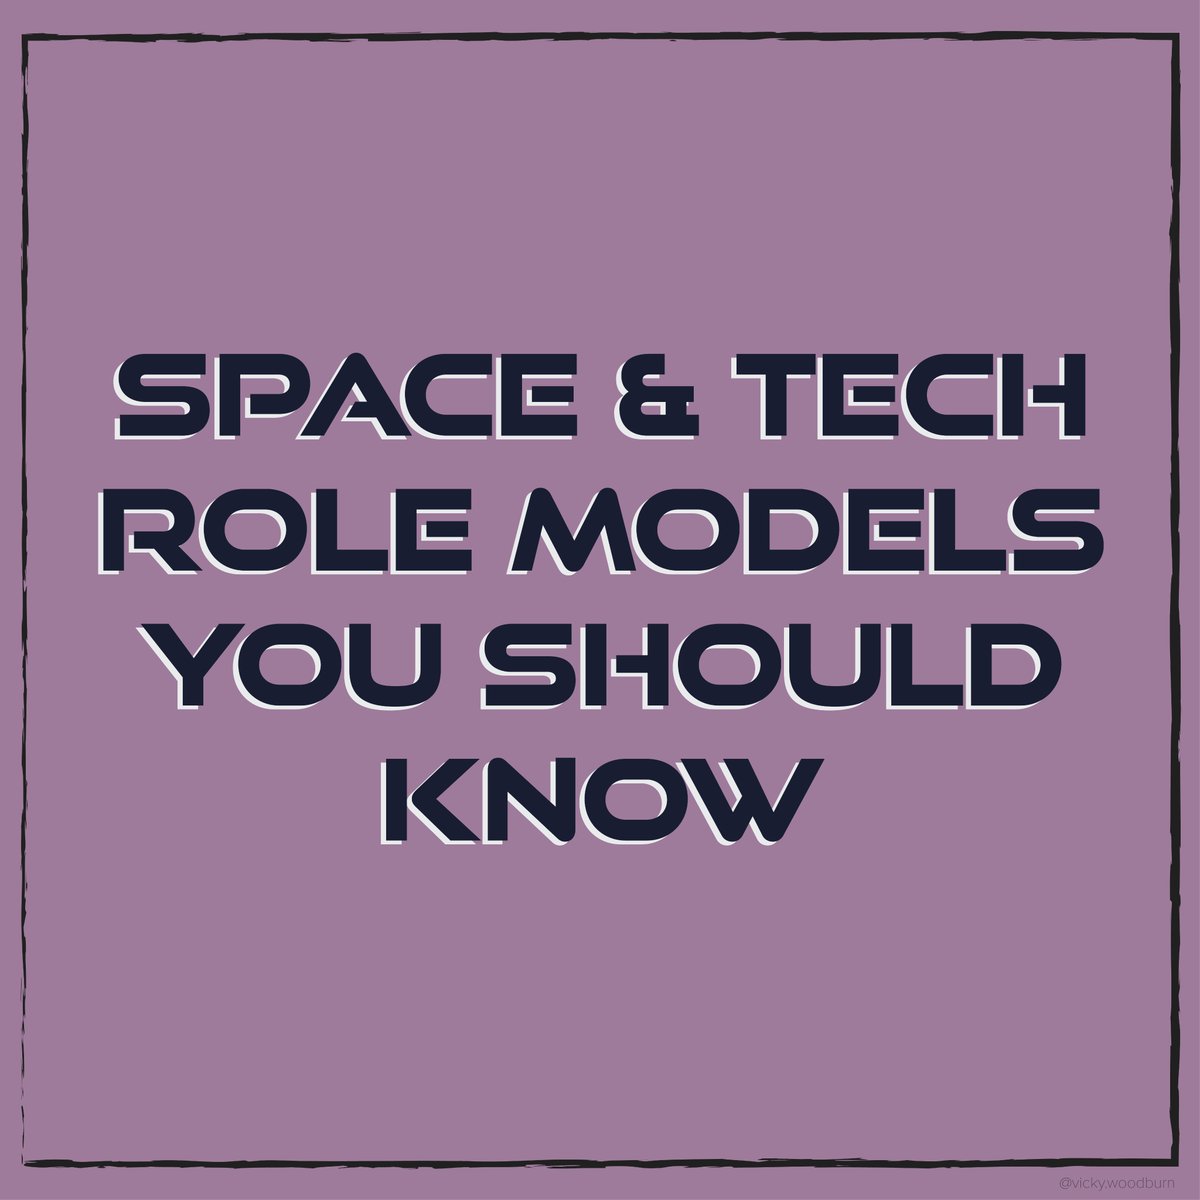 This week, I got to facilitate an  @SGAC workshop on equity in aerospace. One of our biggest takeaways was the importance of role models, so we made a list of some of our favorite role models. This is not a conclusive list and I will follow up with more lists!  #AdAstra